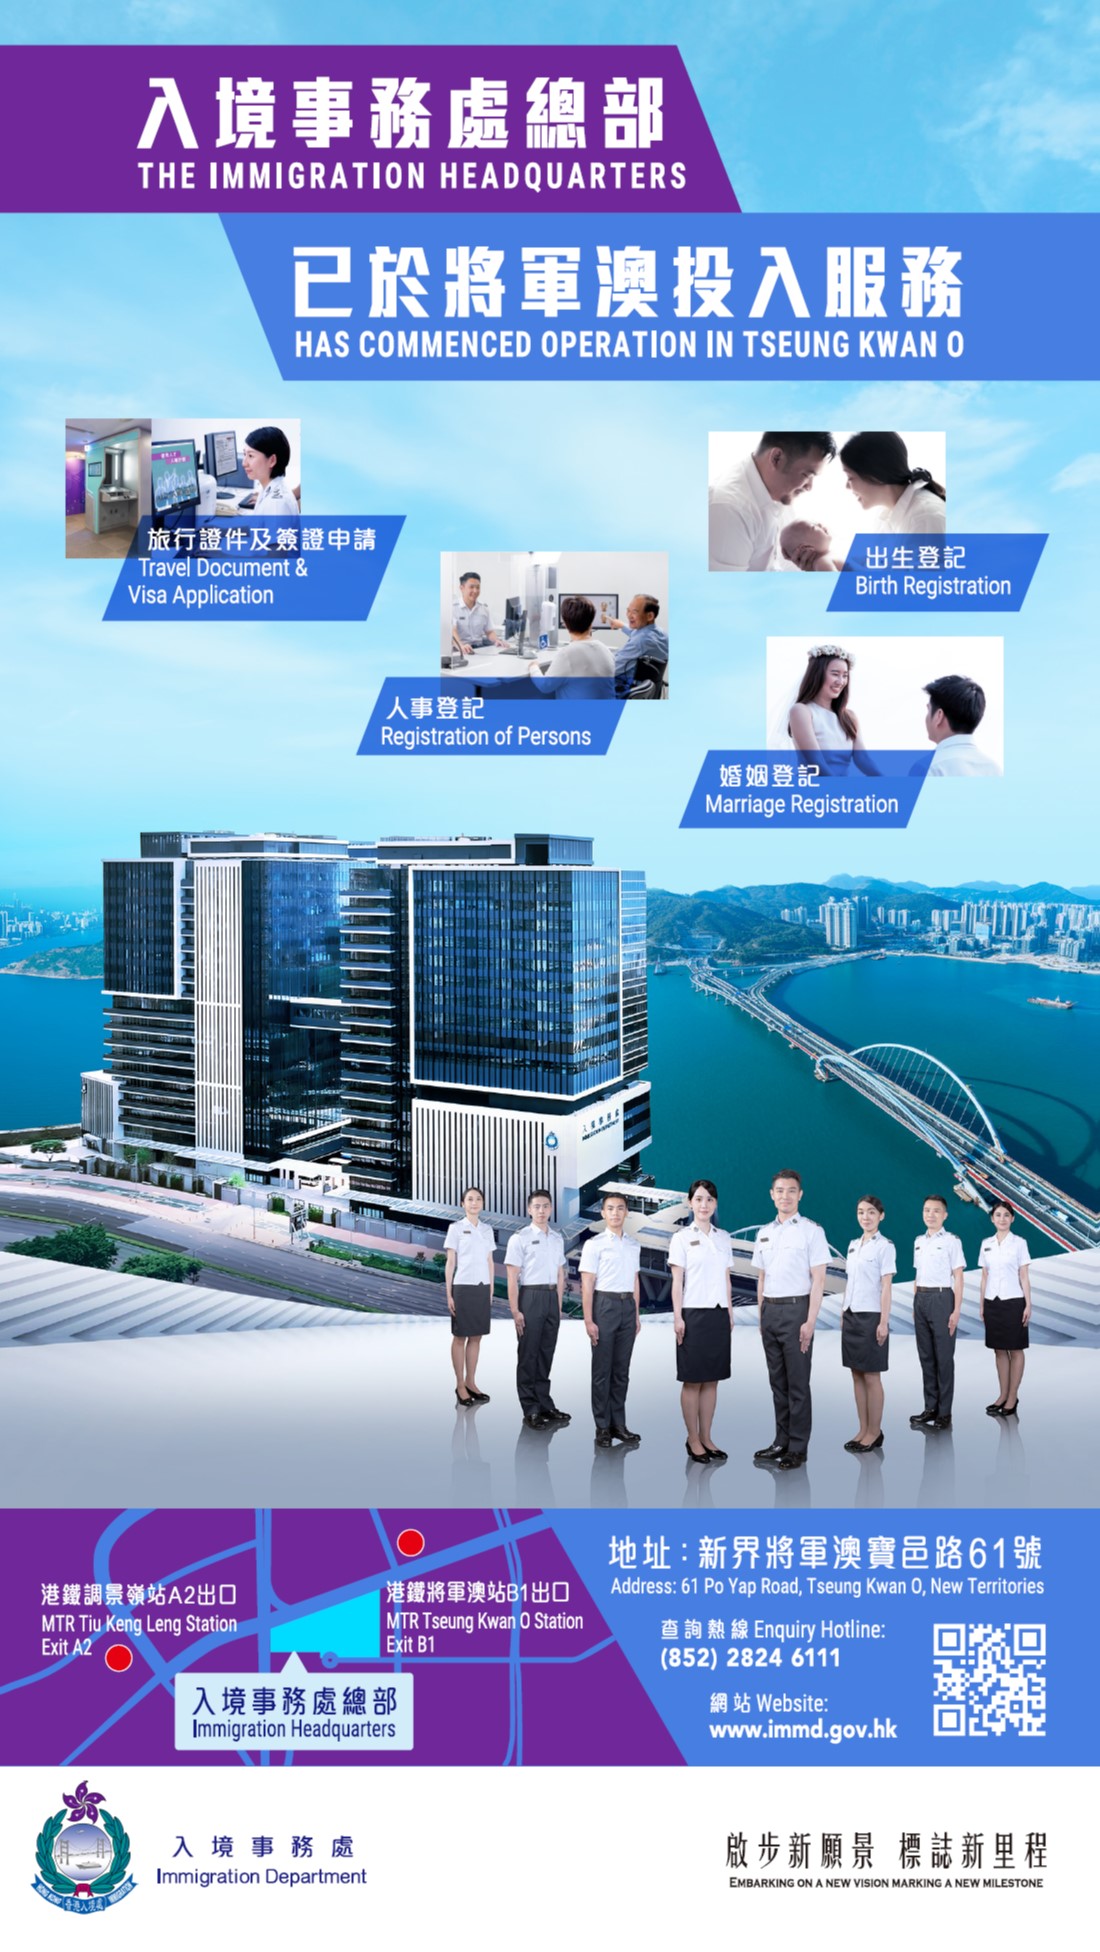 The Immigration Headquarters will move to Tseung Kwan O on 11 June 2024